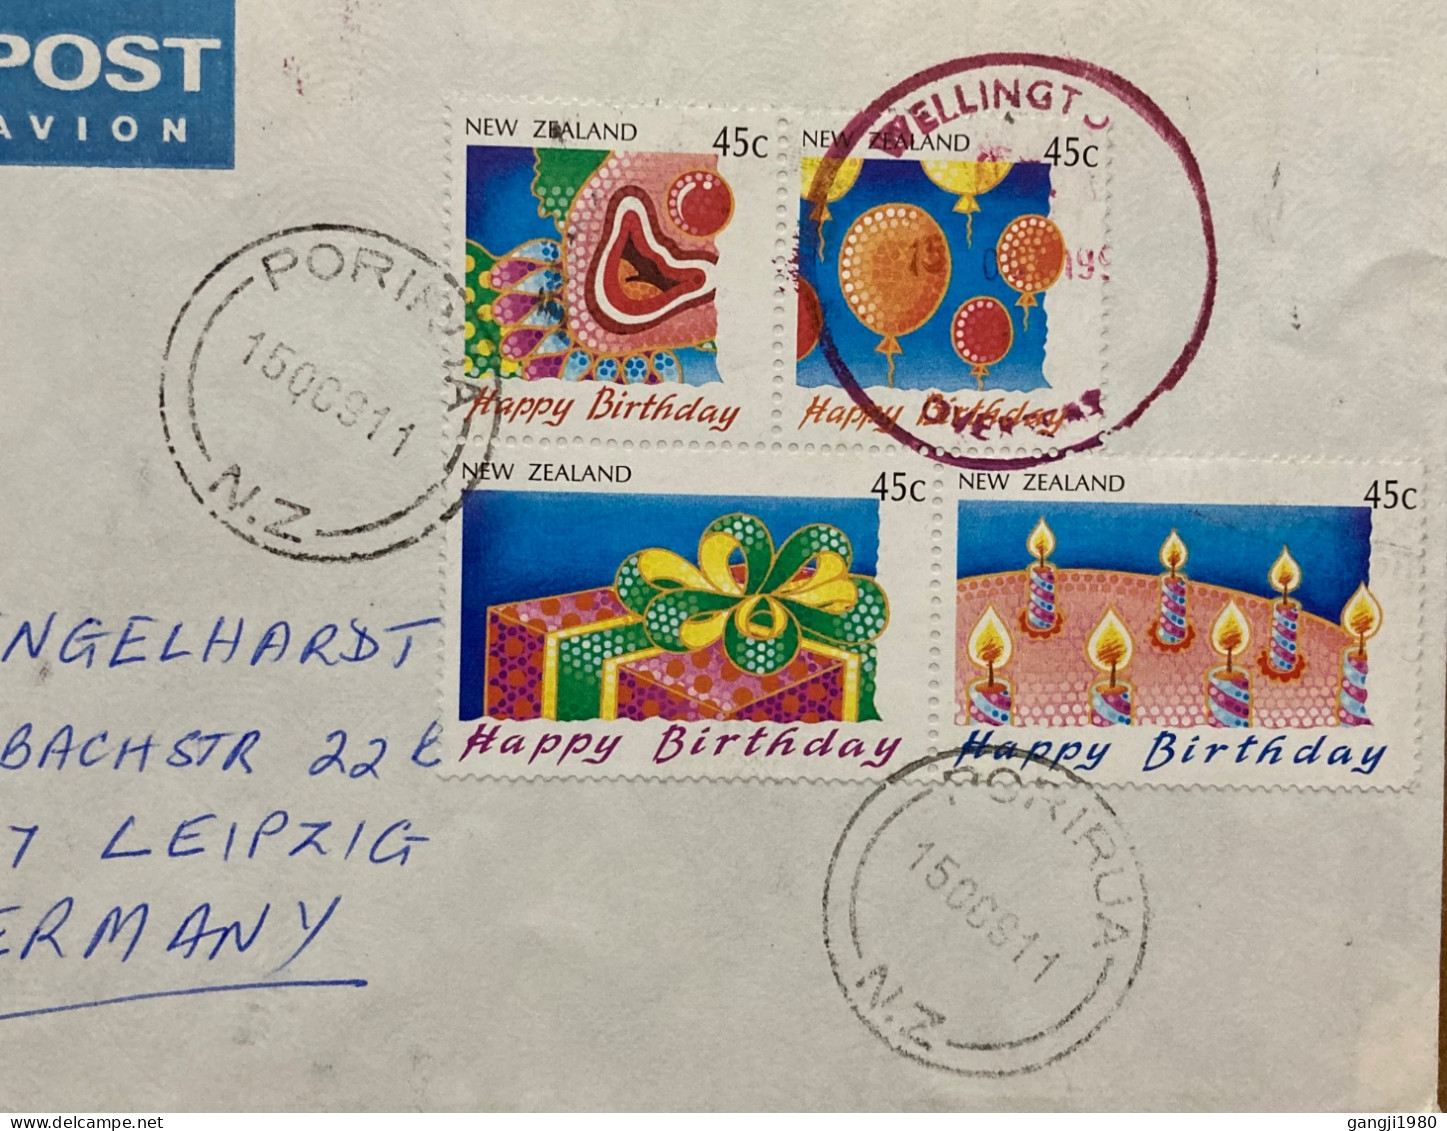 NEW ZEALAND 1991, COVER USED TO GERMANY, HAPPY BIRTHDAY 4 DIFF STAMP, PORIRUA CITY & WELLIGTON CITY CANCEL. - Lettres & Documents